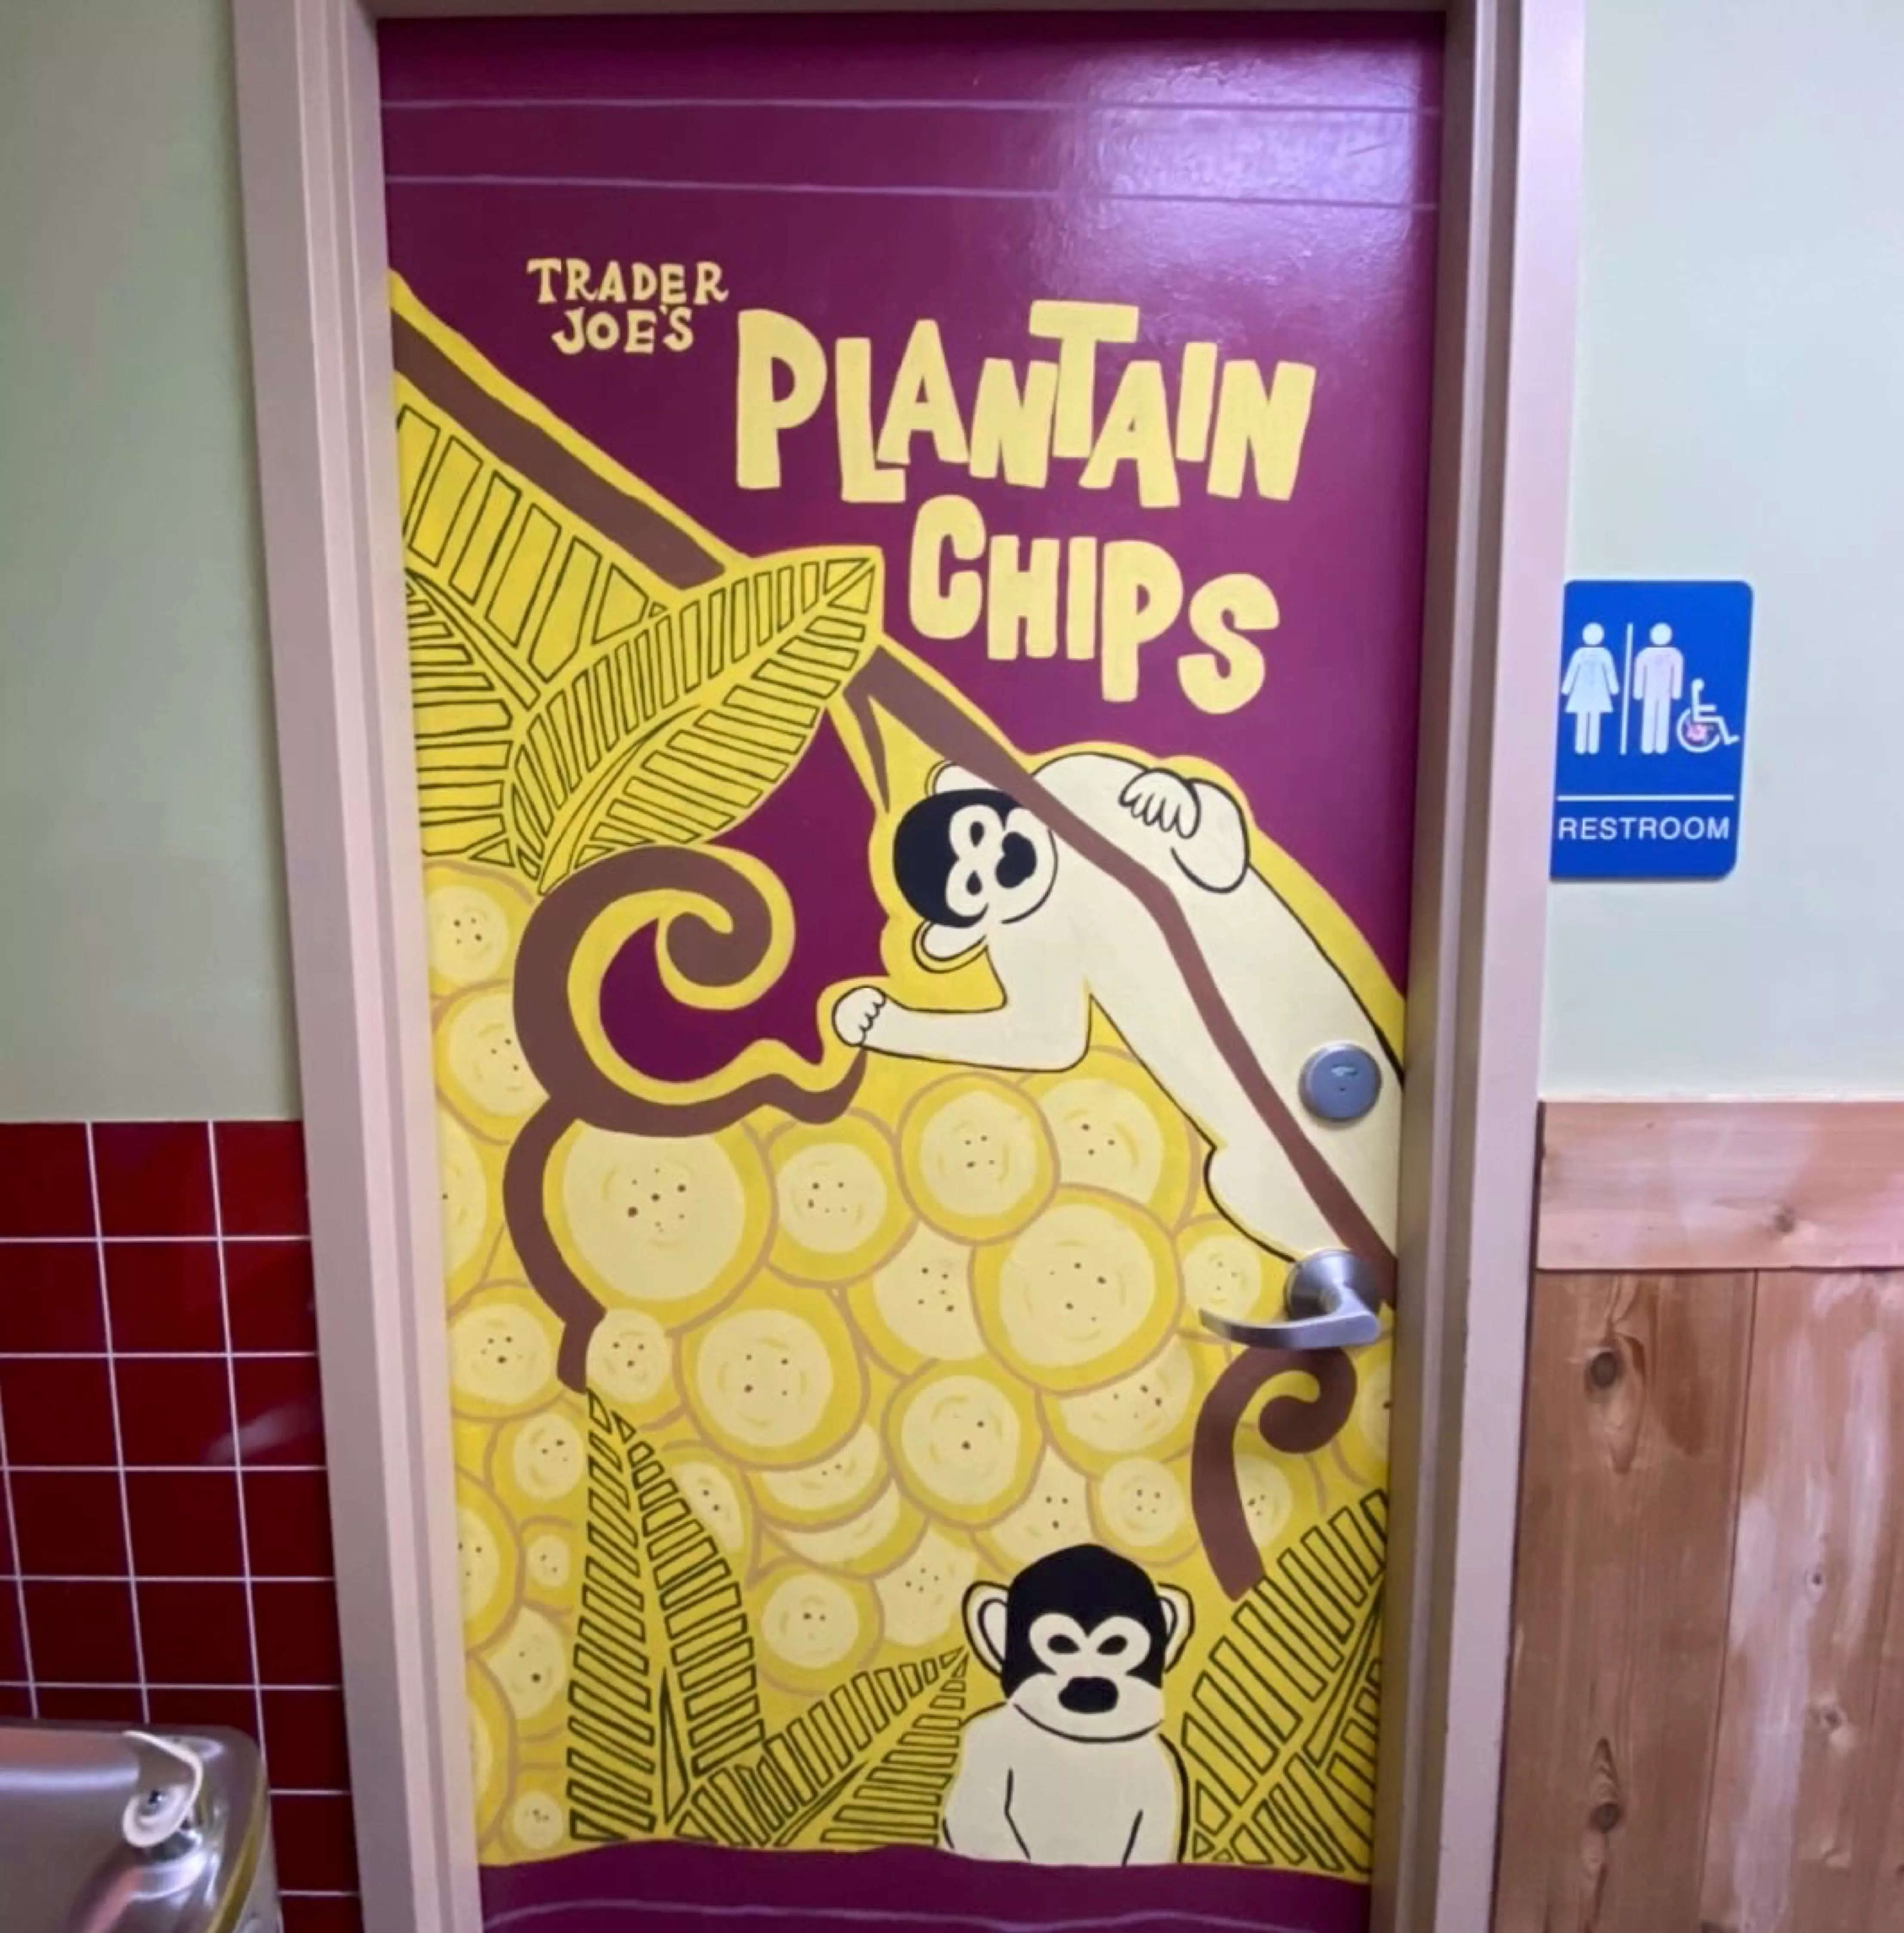 A bathroom door painted to advertise plantain chips.